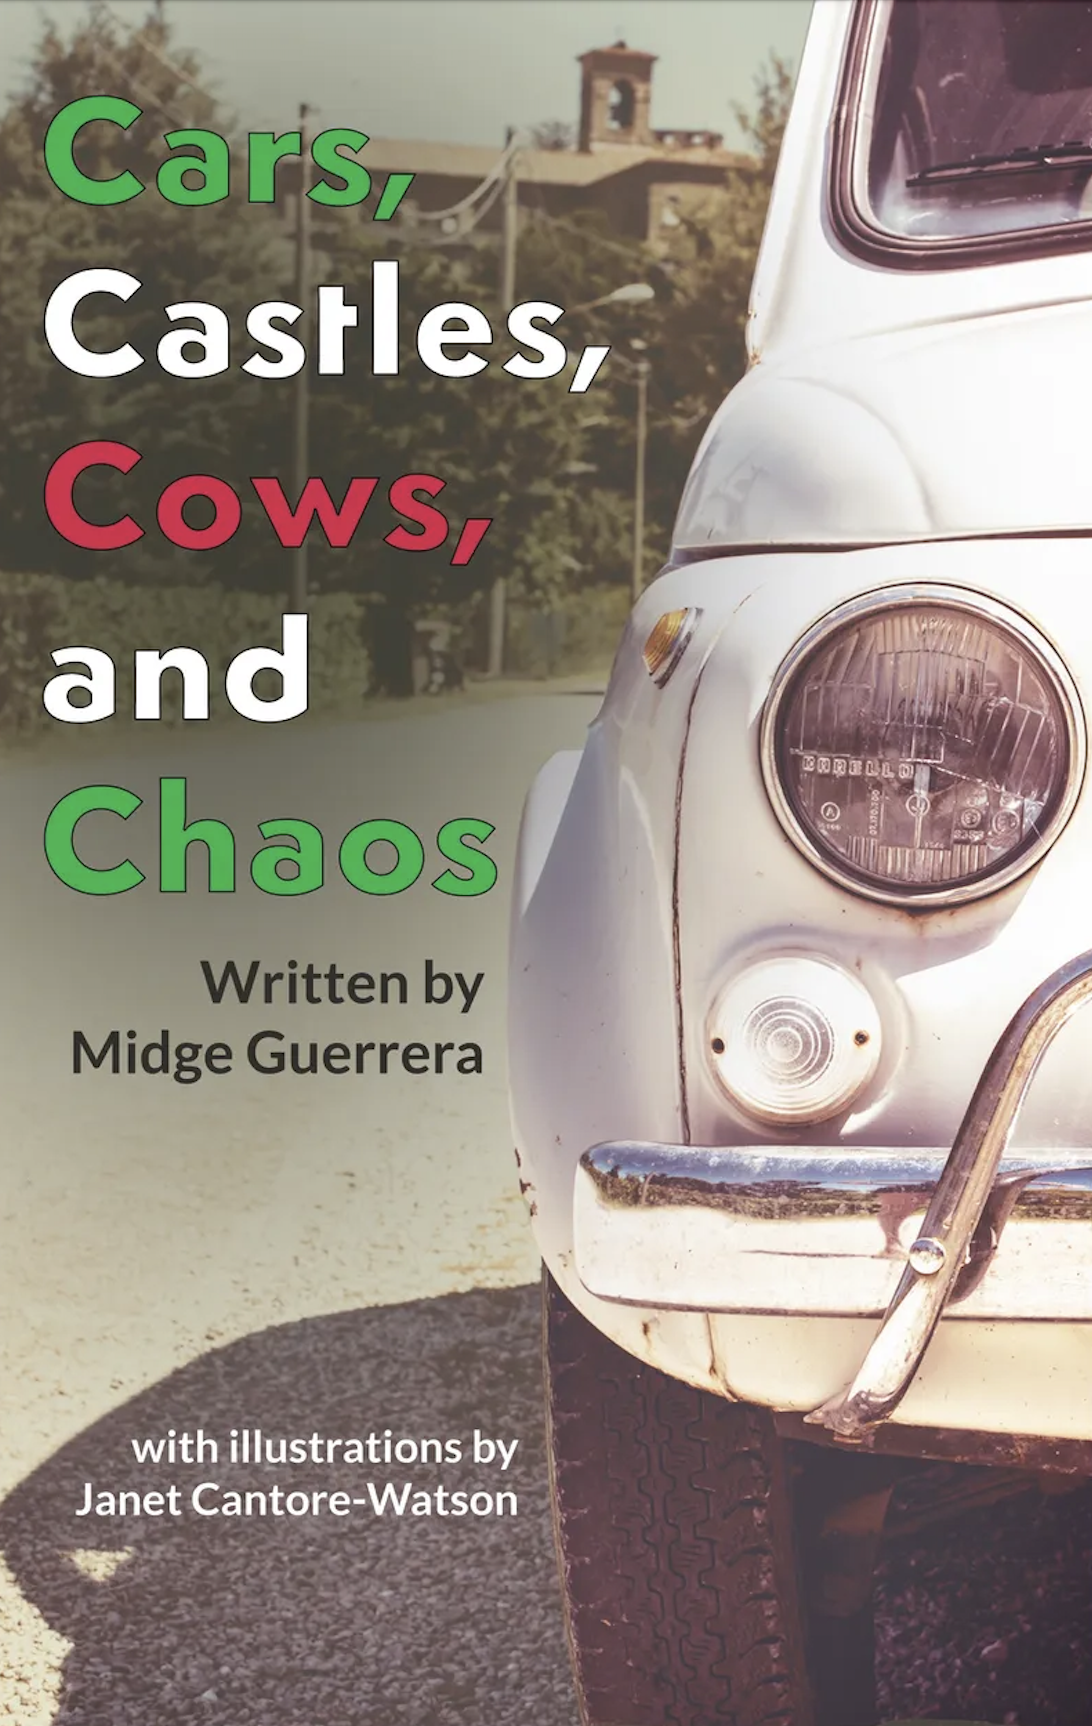 GOTM BOOK REVIEW: CARS, CASTLES, COWS AND CHAOS by Midge Guerrera